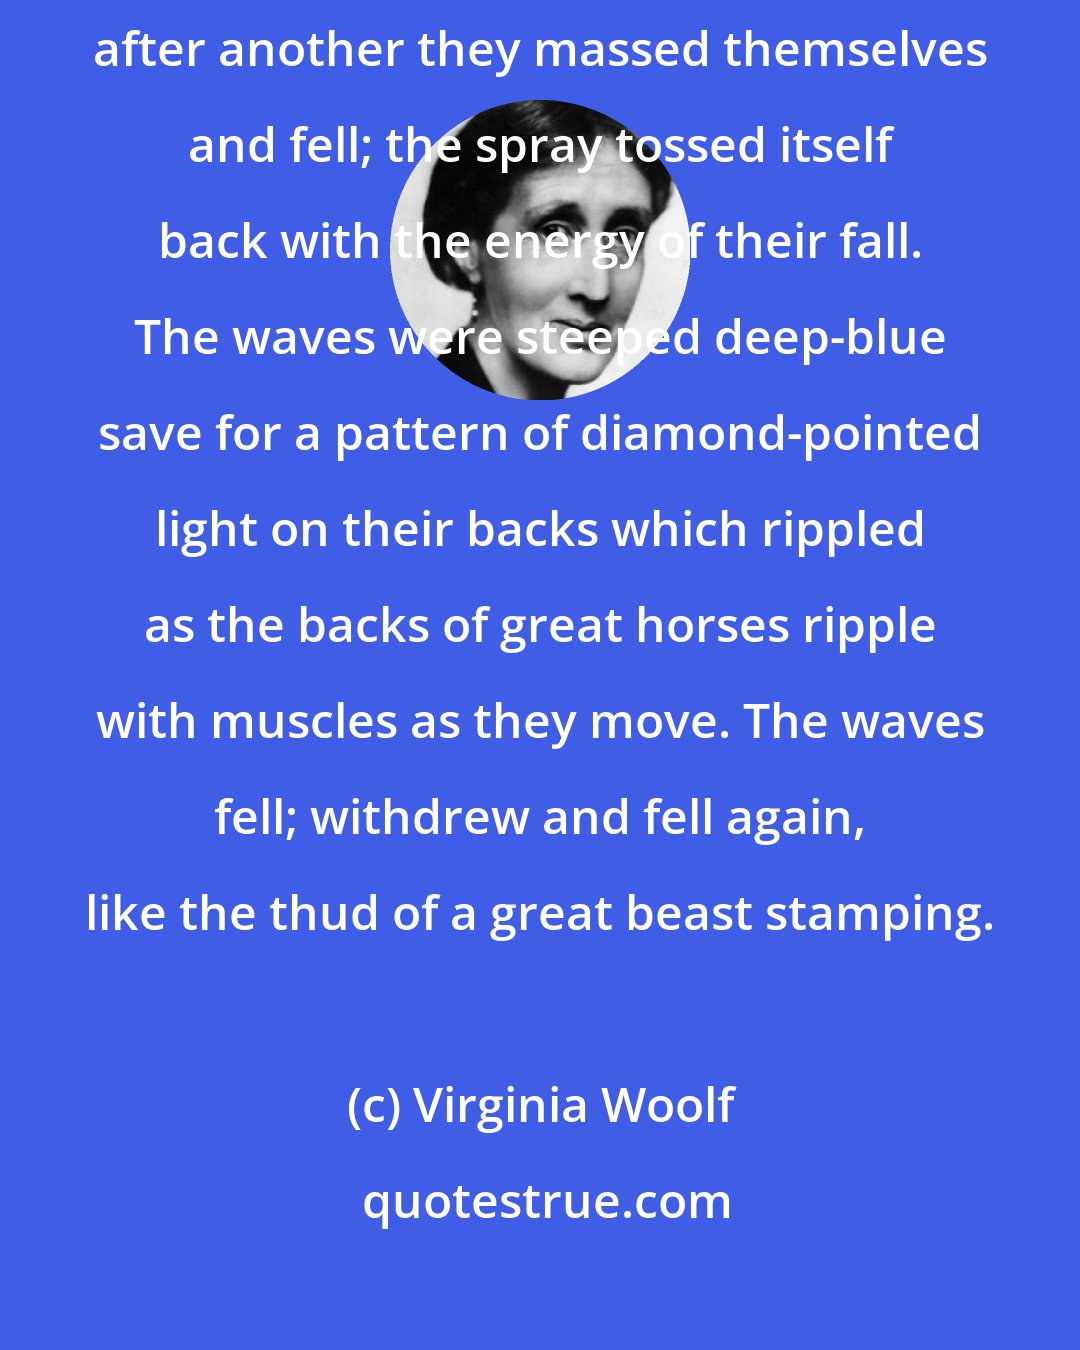 Virginia Woolf: The waves broke and spread their waters swiftly over the shore. One after another they massed themselves and fell; the spray tossed itself back with the energy of their fall. The waves were steeped deep-blue save for a pattern of diamond-pointed light on their backs which rippled as the backs of great horses ripple with muscles as they move. The waves fell; withdrew and fell again, like the thud of a great beast stamping.